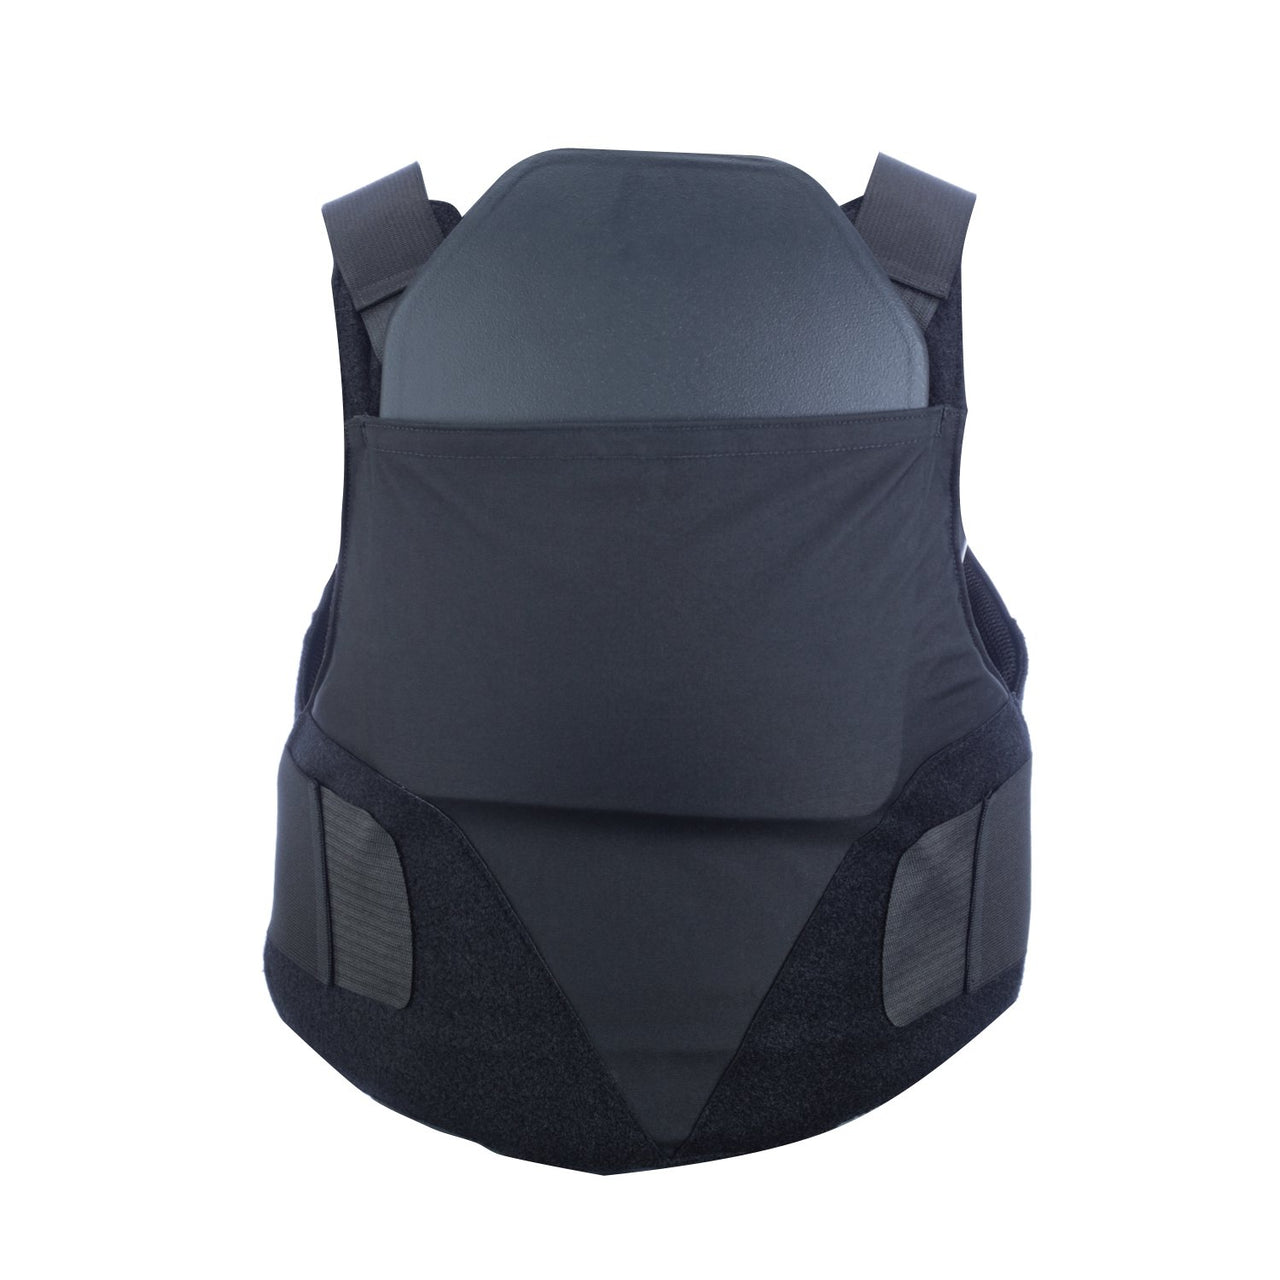 An image of a black Body Armor Direct All American Concealable Enhanced Multi-Threat Vest on a white background.